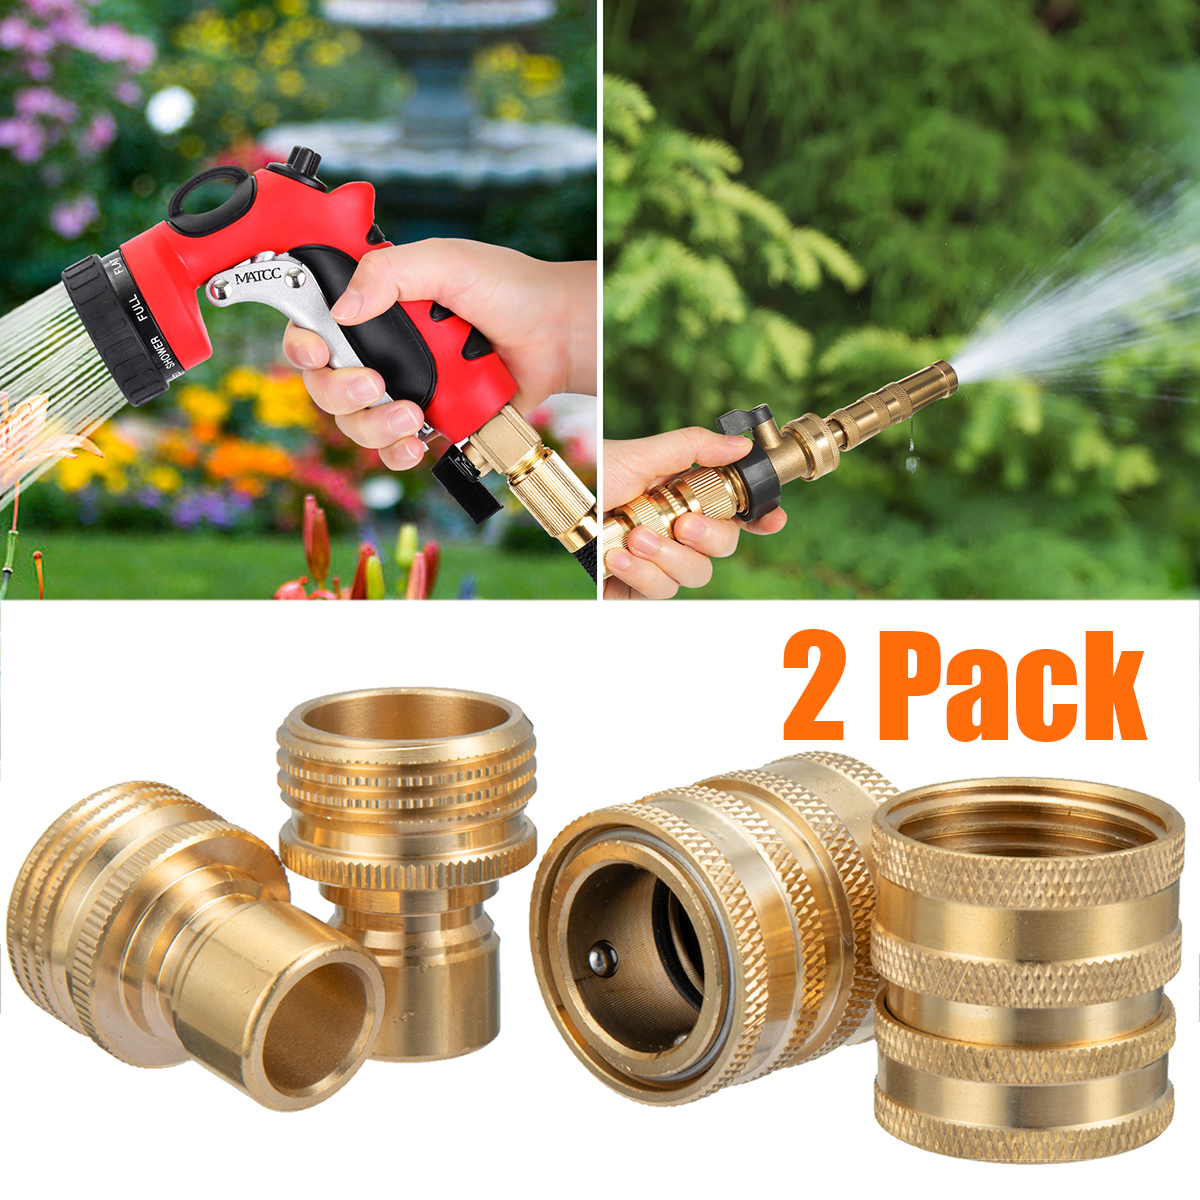 Garden-Hose-34in-GHT-Cokden-Solid-Brass-Quick-Connect-Kit-Watering-Outdoor-Home-1949837-10